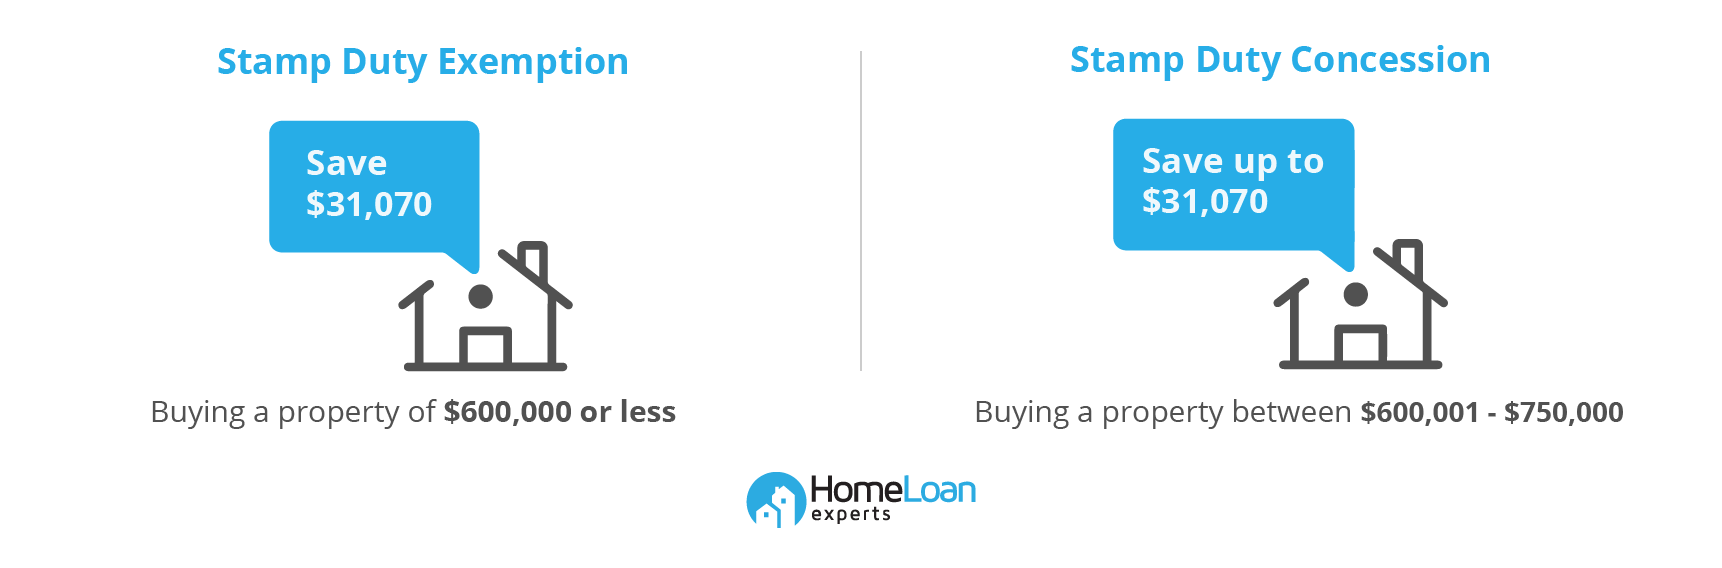 Savings from stamp duty exemption and concession for buying property up to  million in Vic are shown side by side